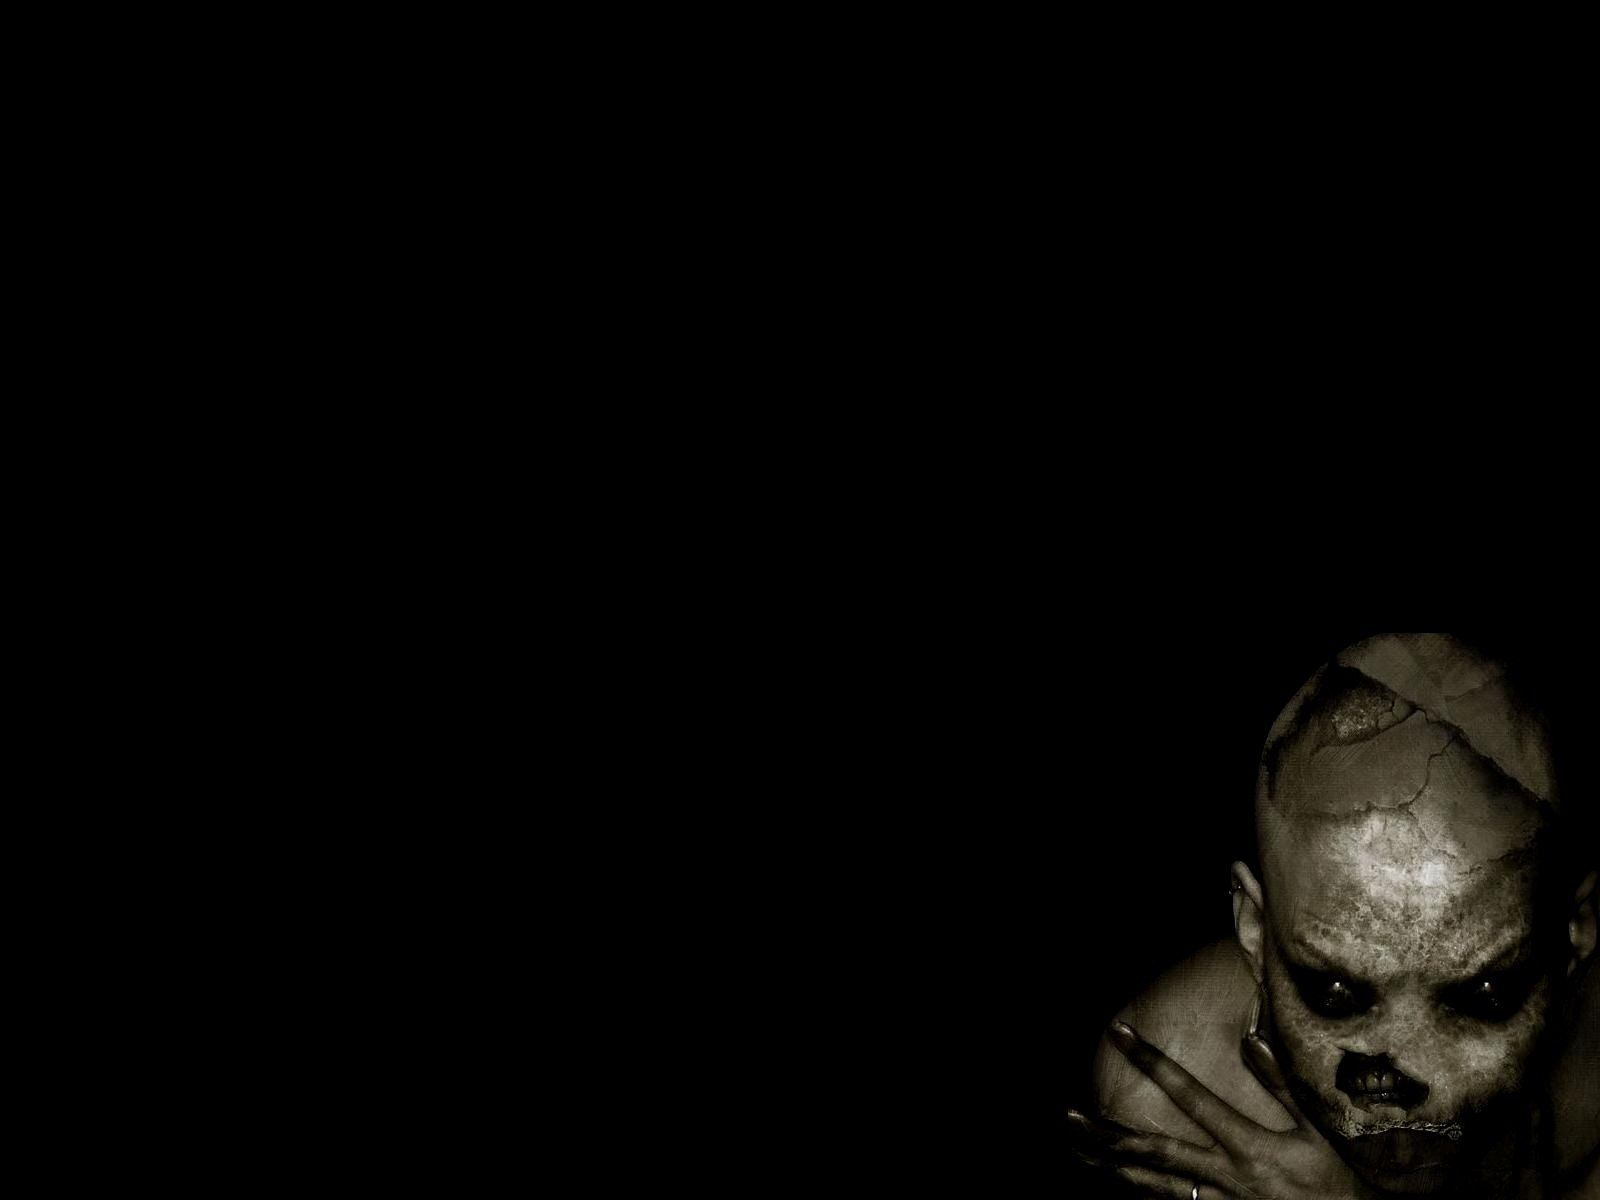 Zombie wallpaper 1600x1200 - - High Quality and other